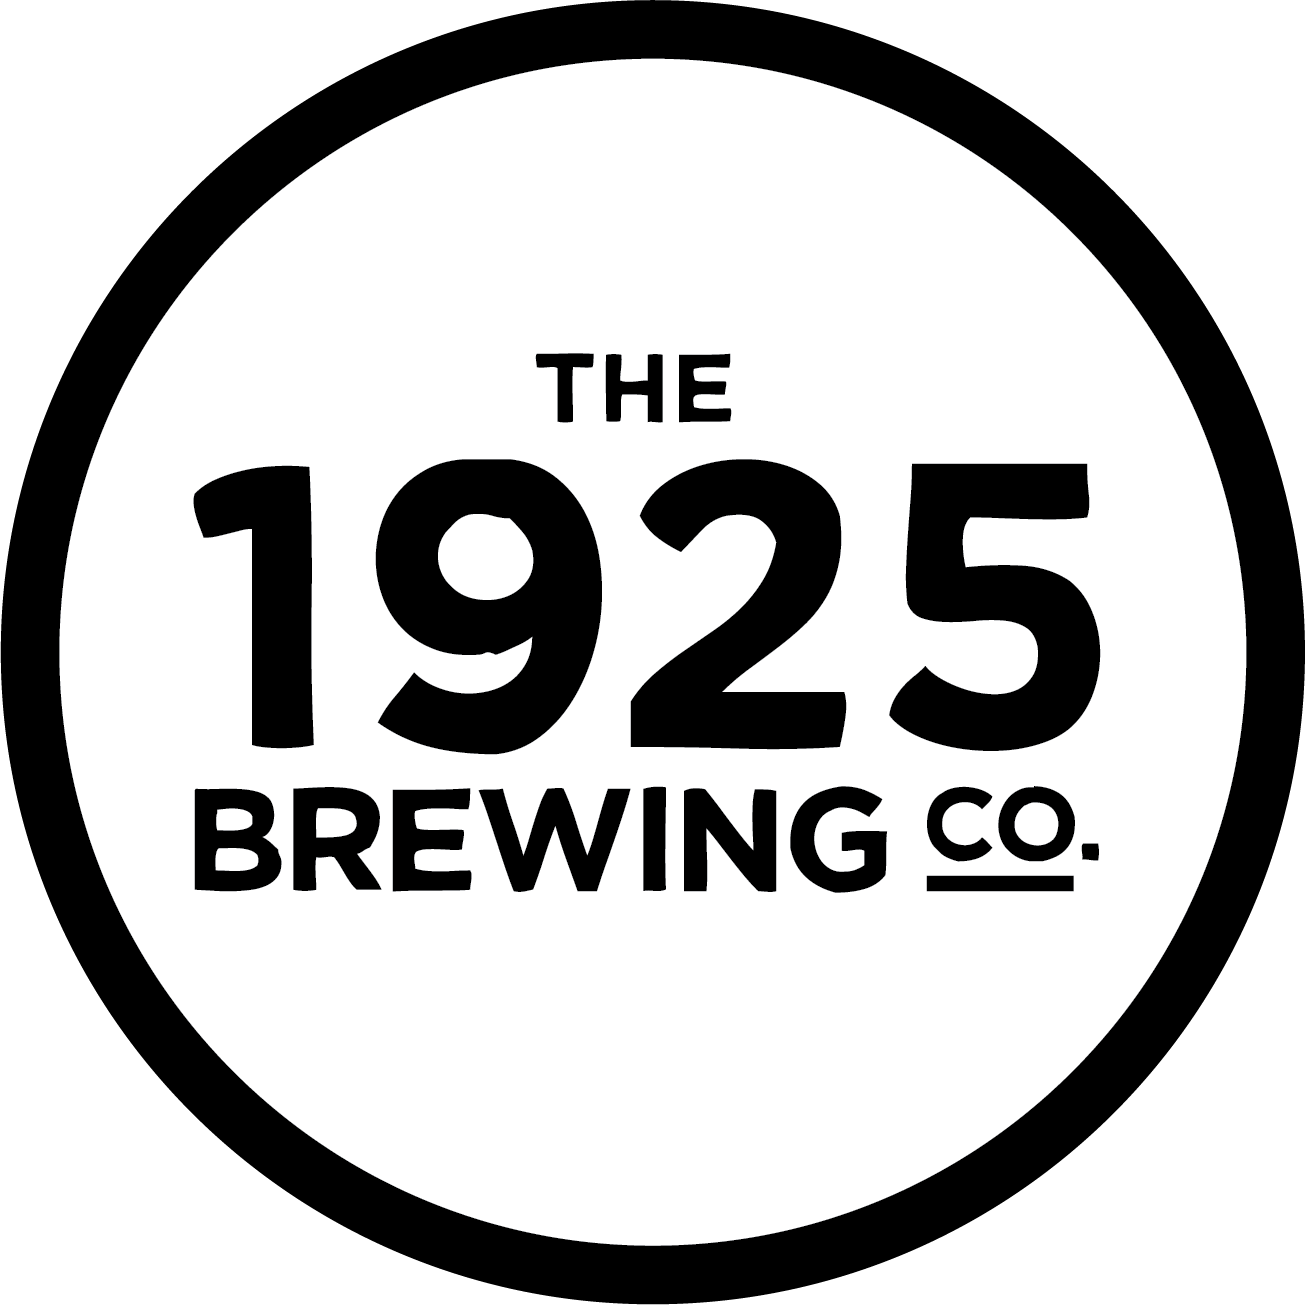 The 1925 Brewing Co. Flagship Store